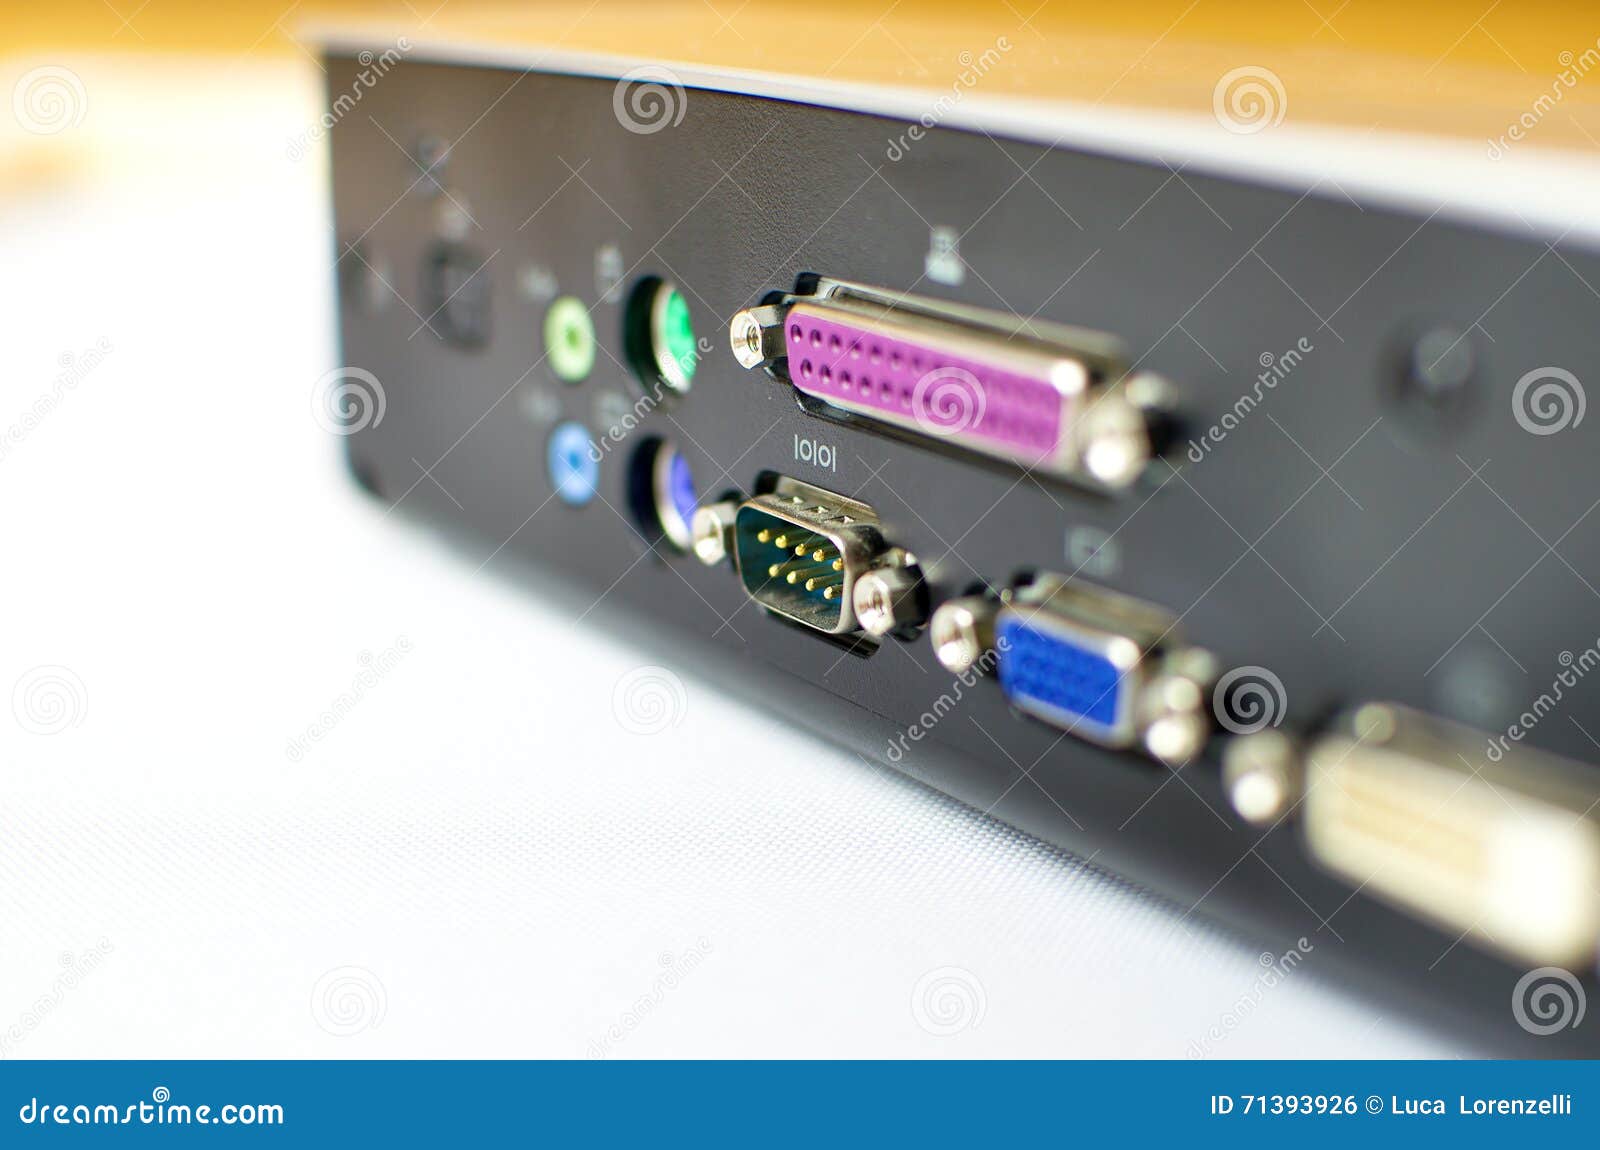 805 Serial Port Photos Free Royalty Free Stock Photos From Dreamstime